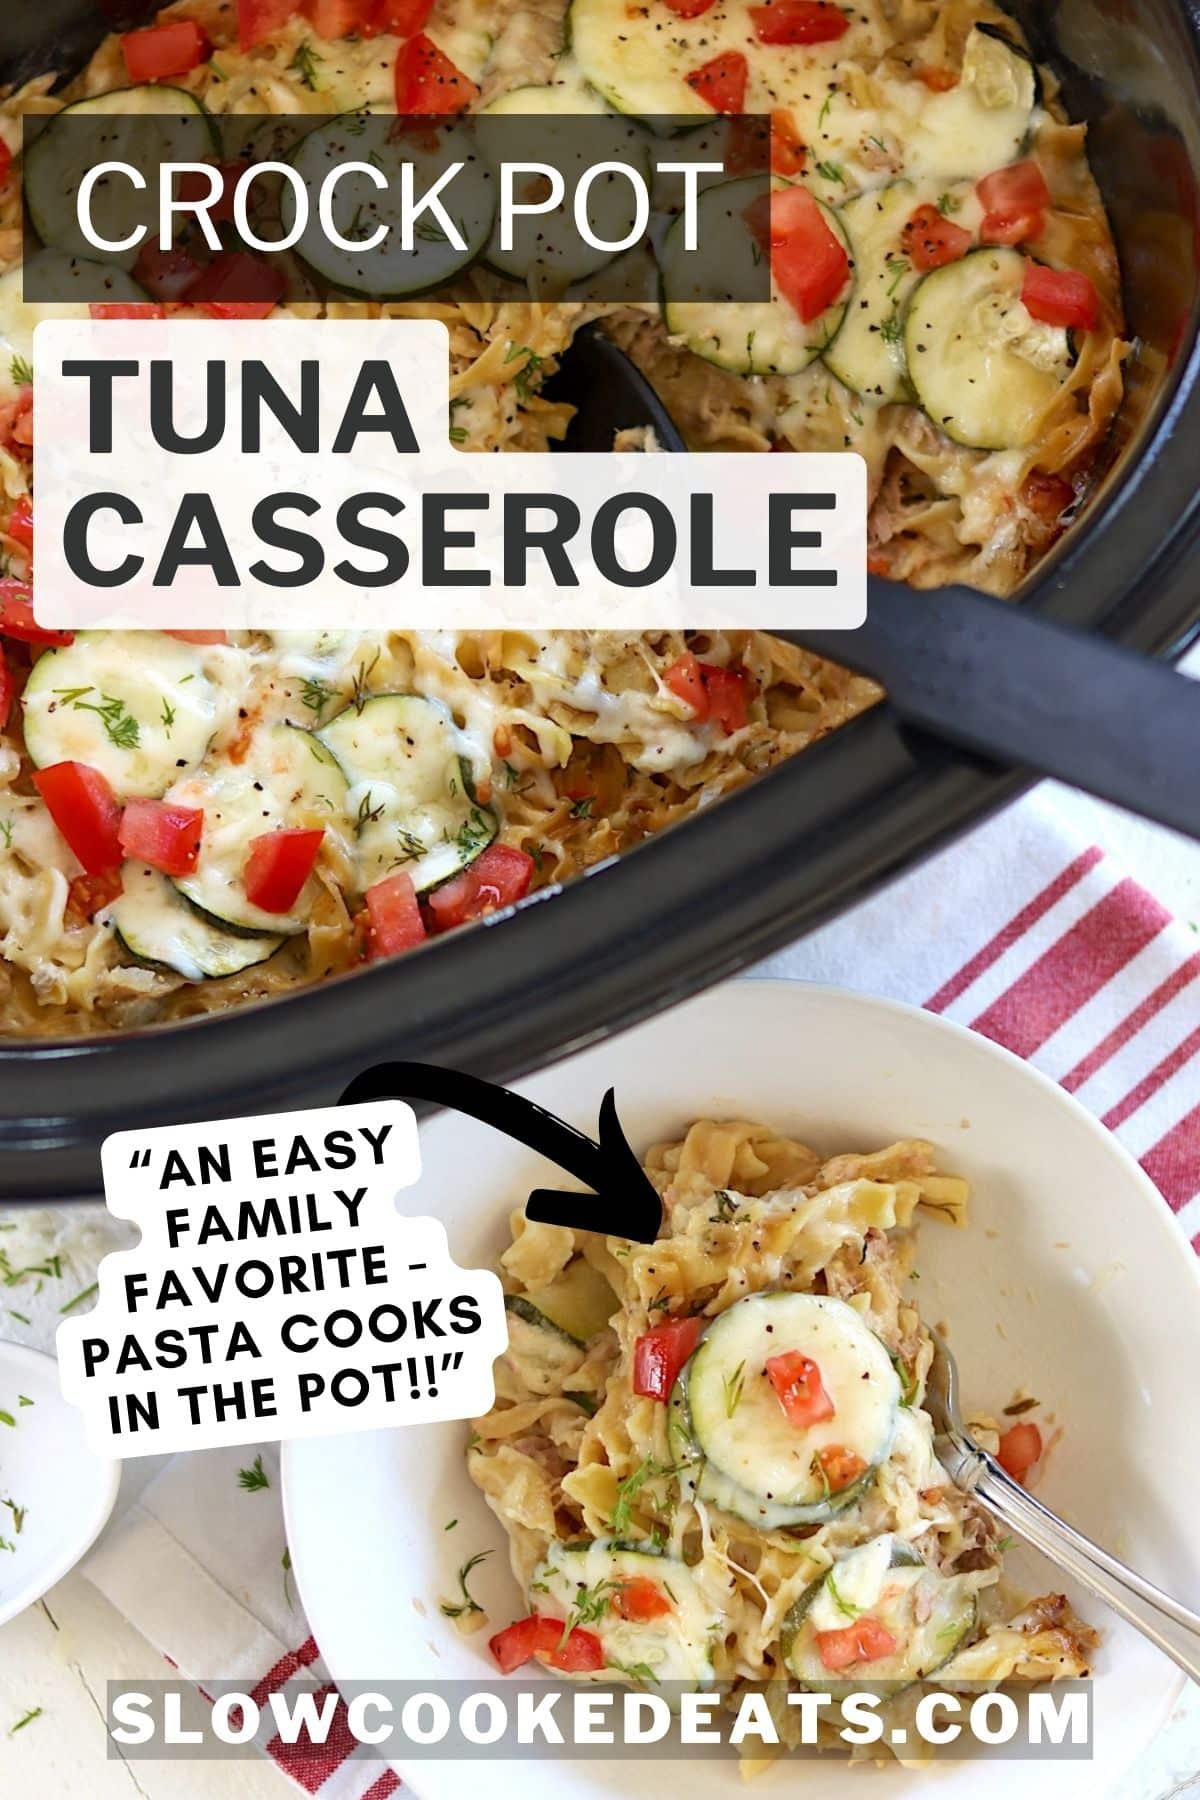 Pinterest pin with crock pot tuna casserole served in a white bowl.